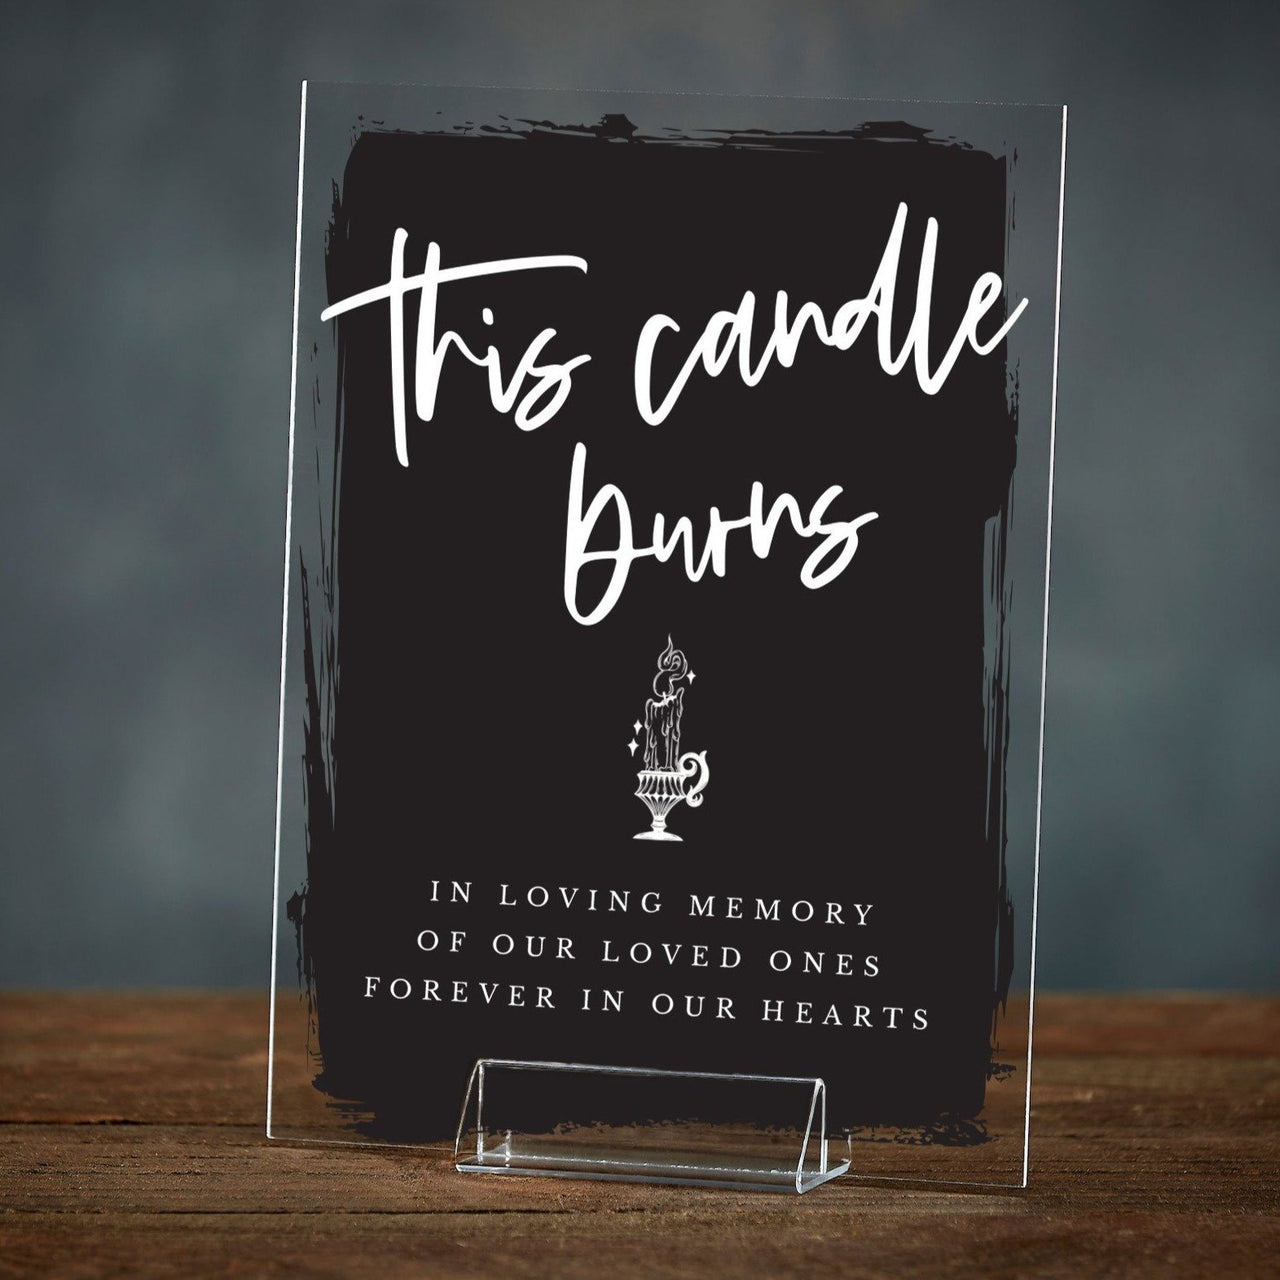 This Candle Burns Halloween Acrylic Wedding Sign - Rich Design Co